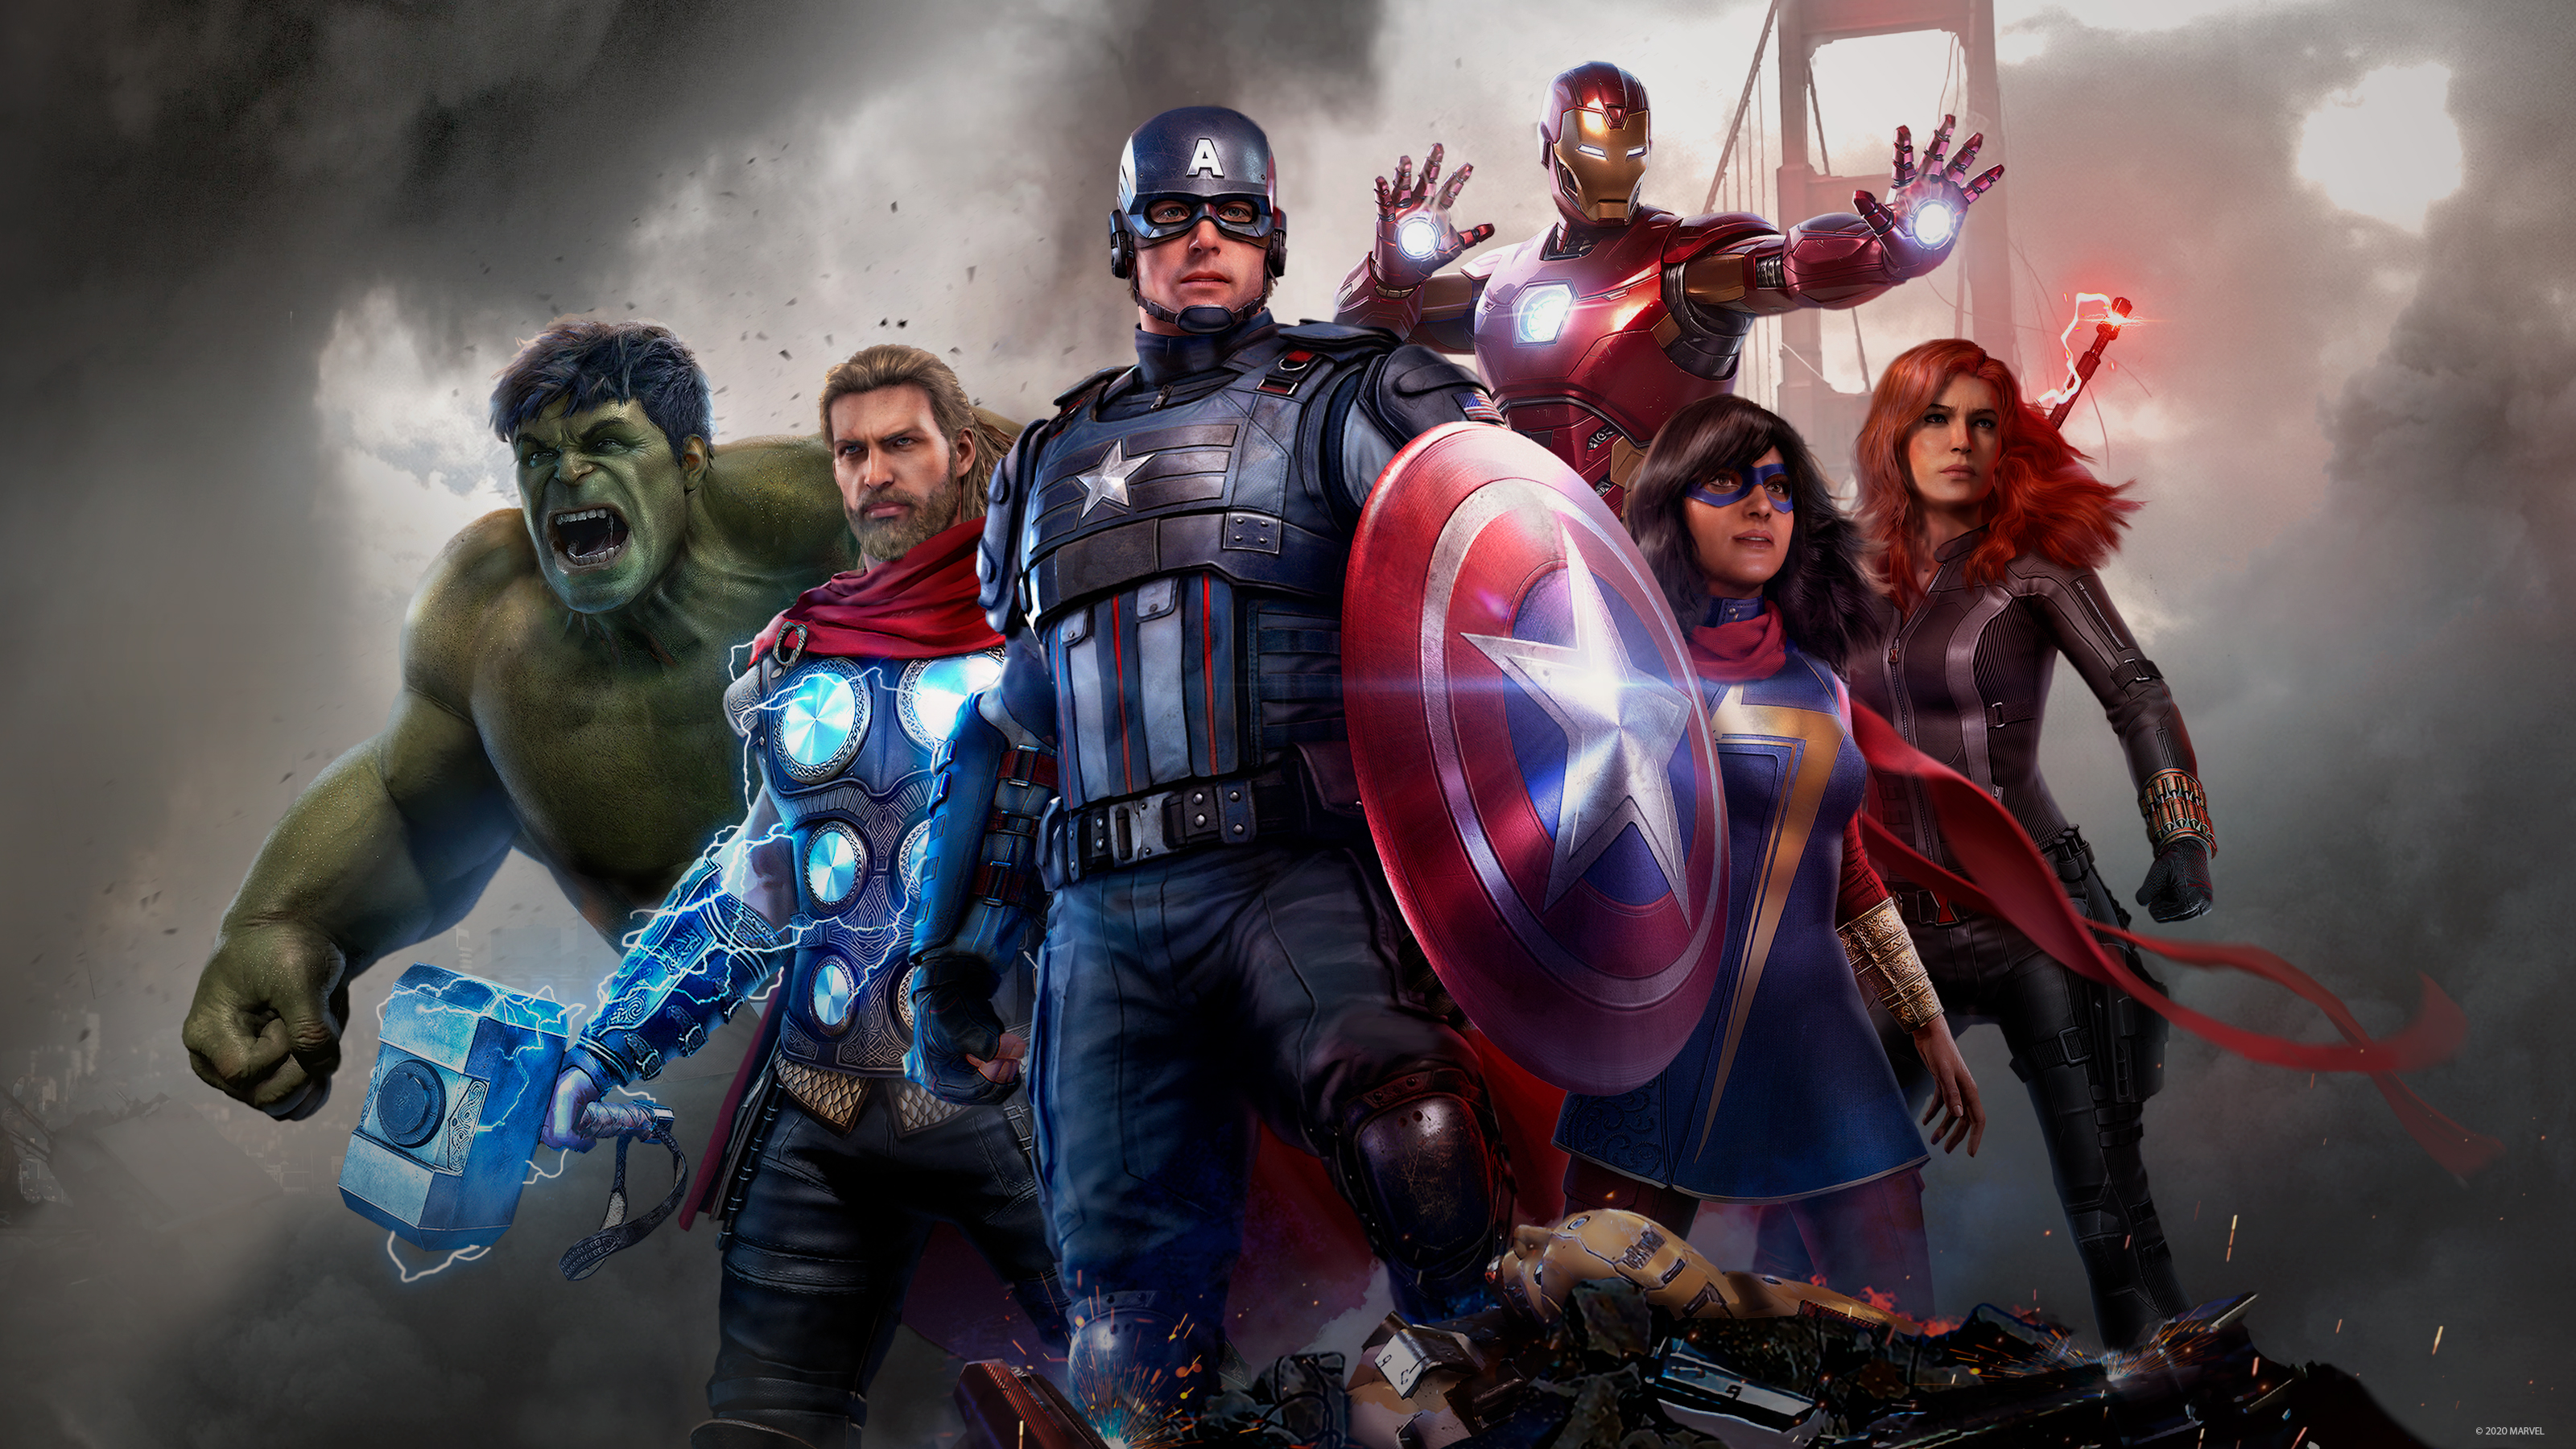 Avengers: Footage of Cancelled Game Surfaces Online